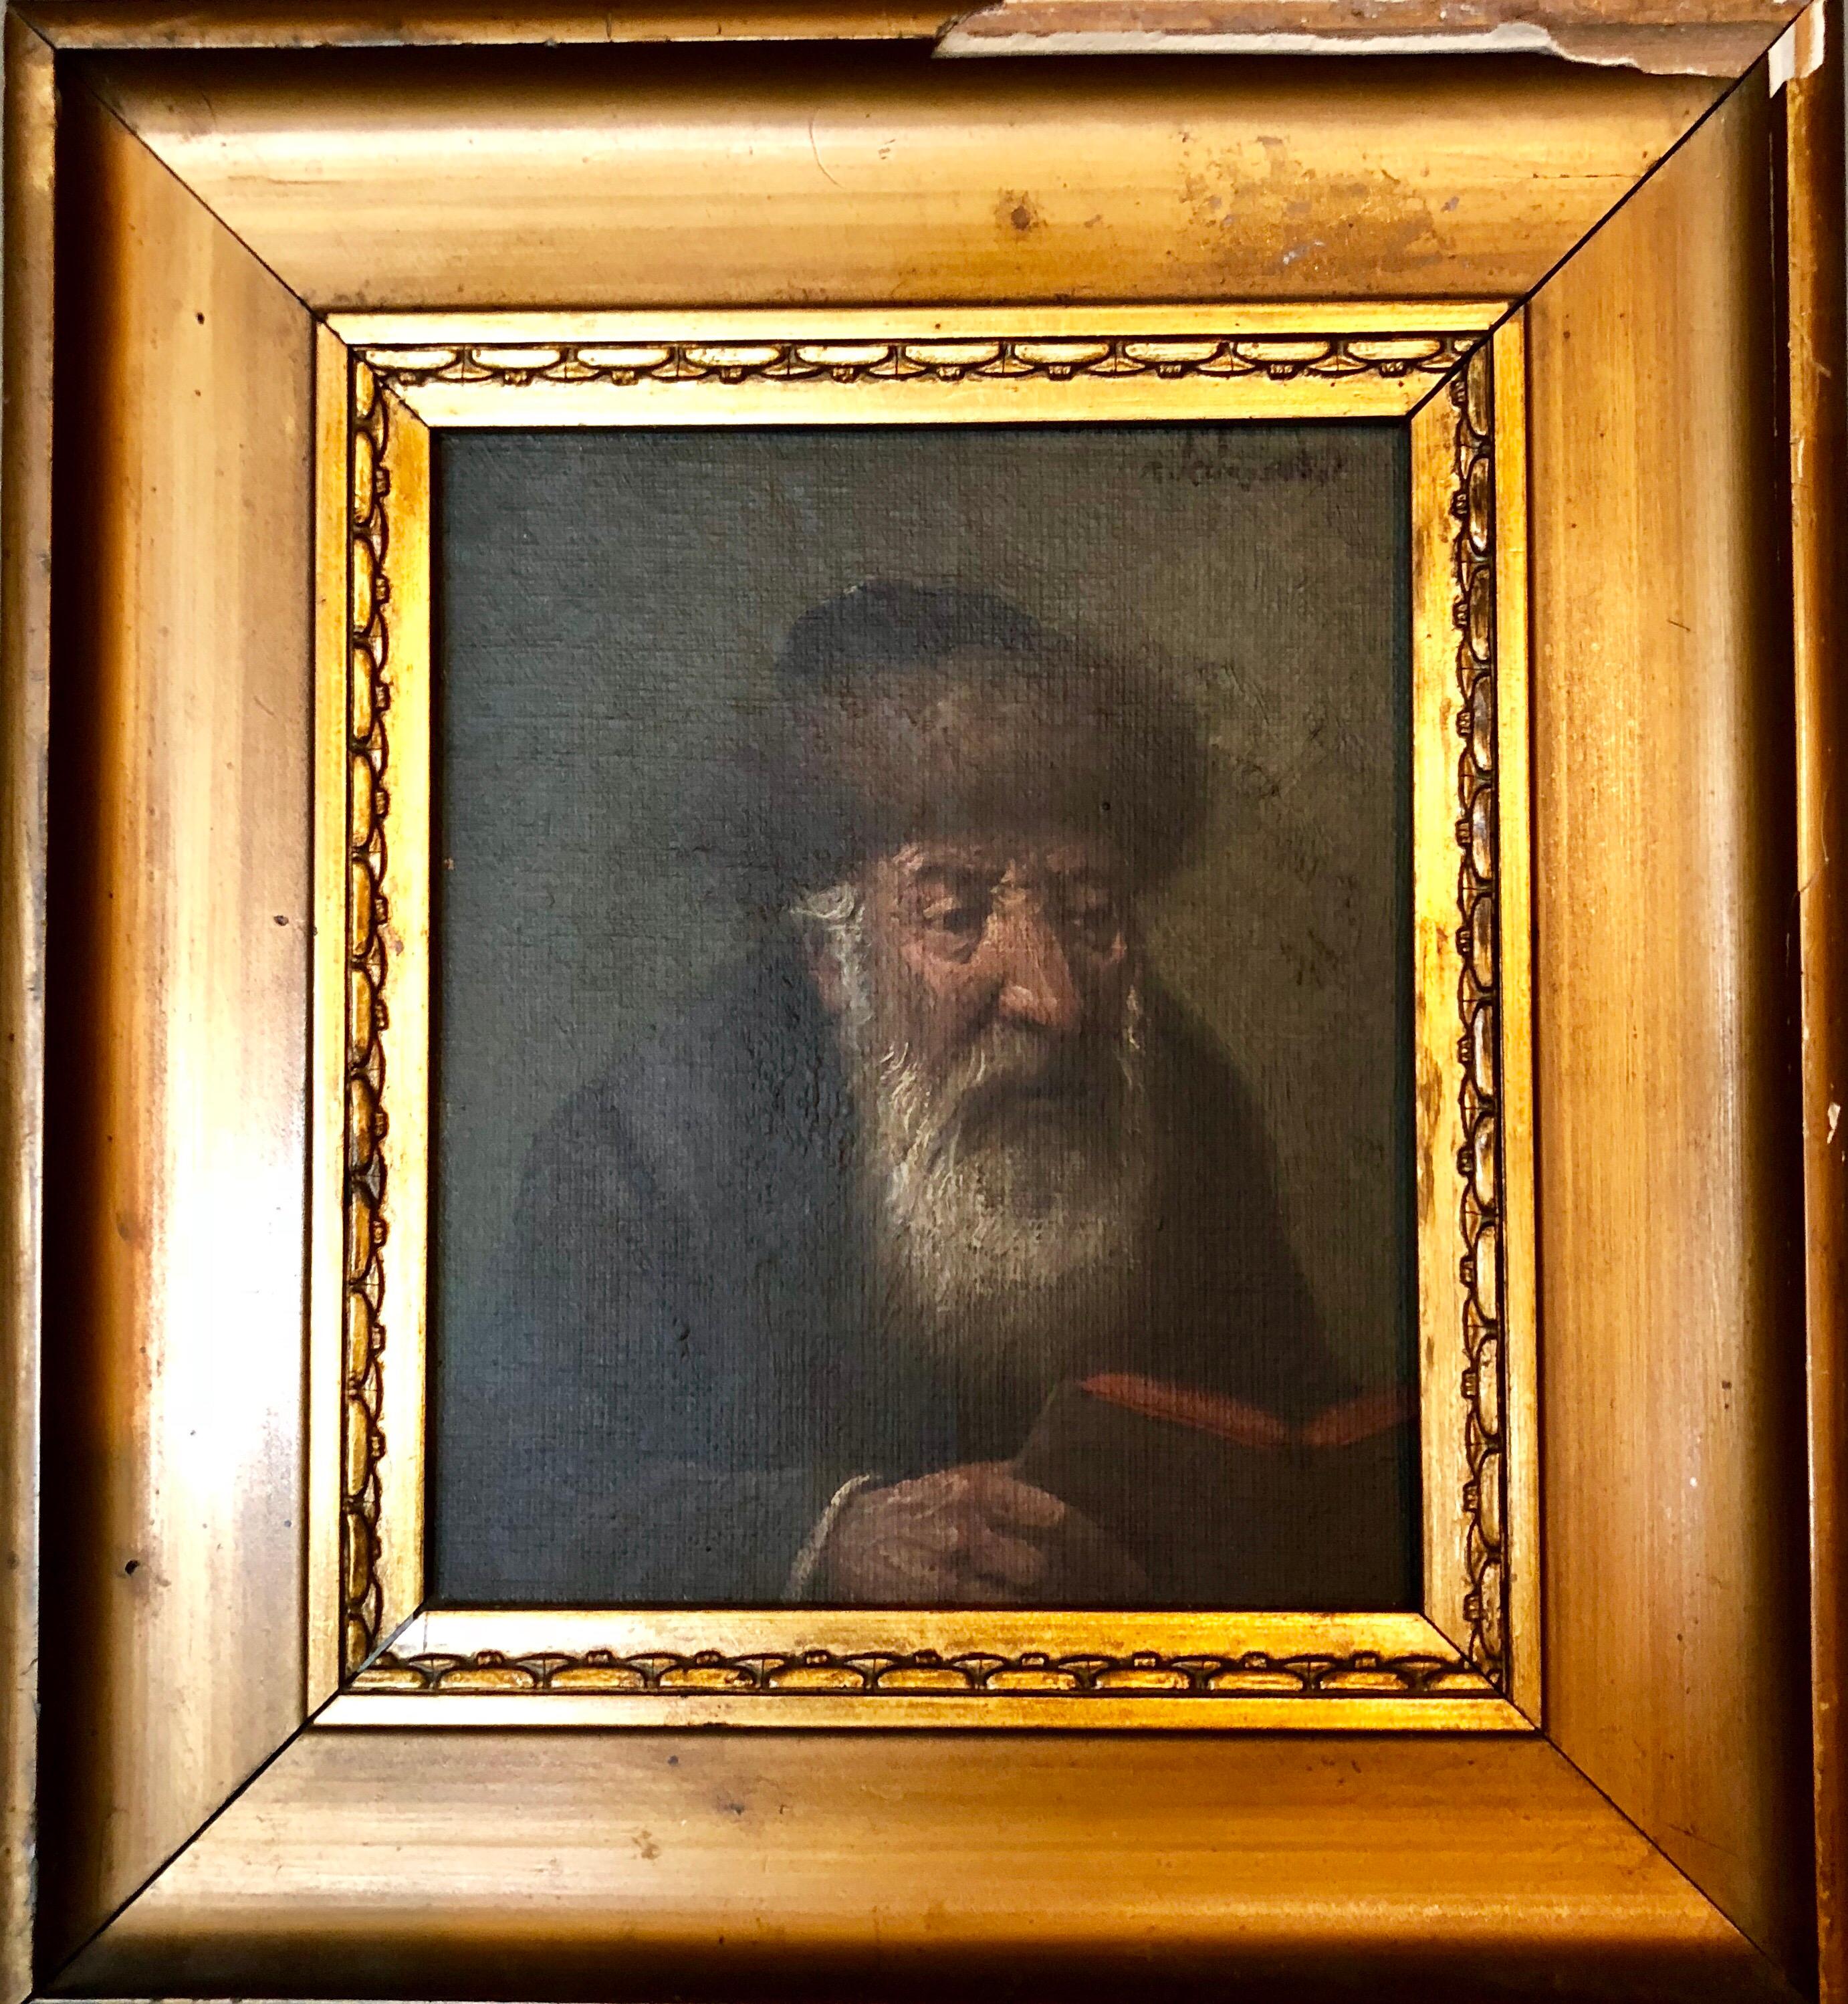 Rudolf KLINGSBÖGL Austrian Viennese painter and teacher. Chassidic rebbe with Shtreimel.
Klingsbogl was active in Vienna and is known for his typical portraits and paintings of interiors - workshops, pubs and cellars. His style is very distinctive.